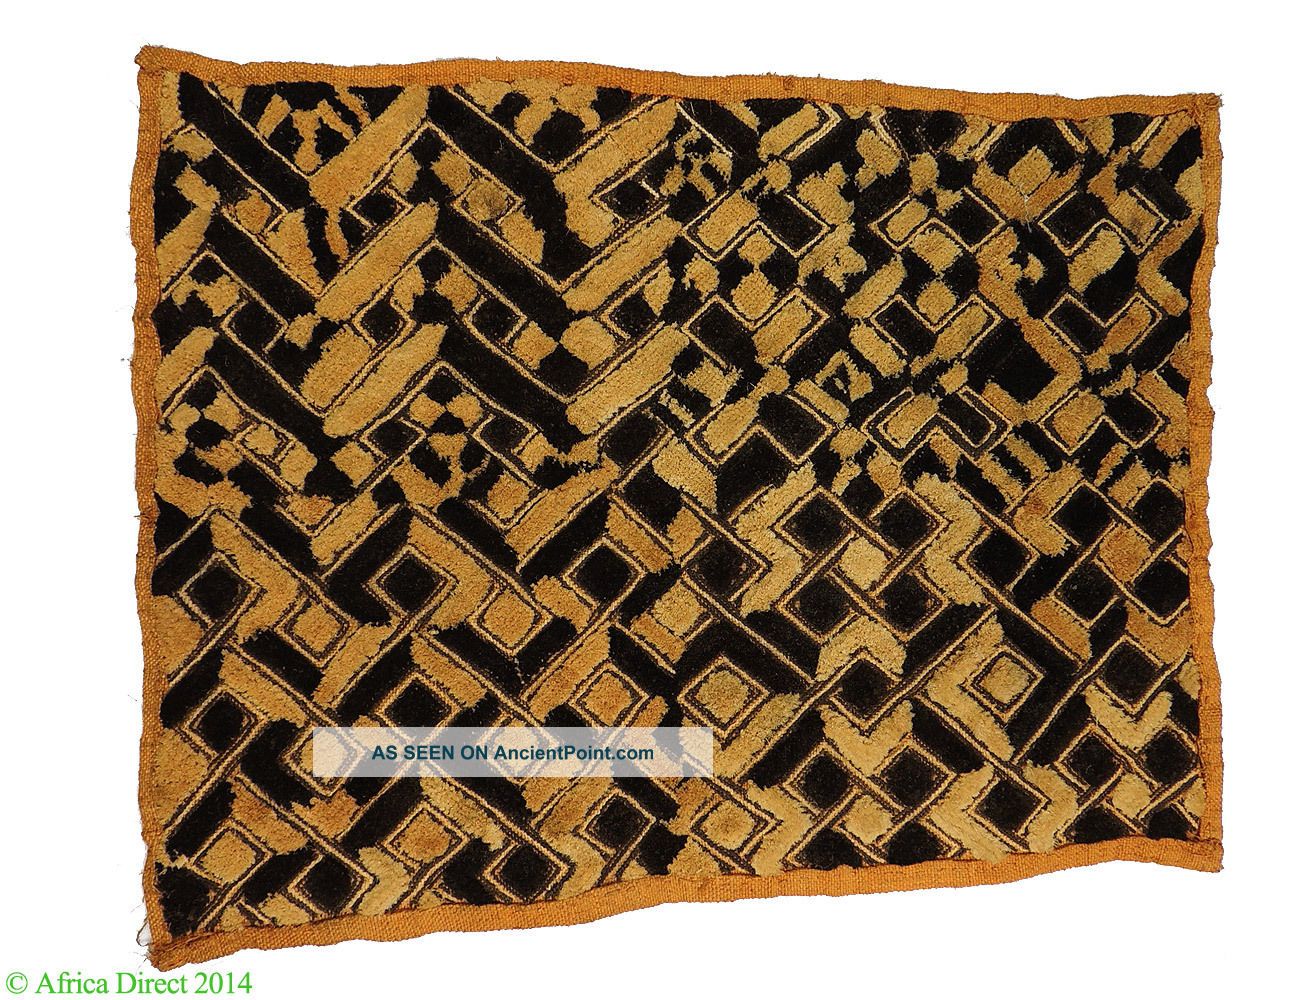 Kuba Raffia Square Kasai Velvet Textile Boutallah African Was $89 Other African Antiques photo